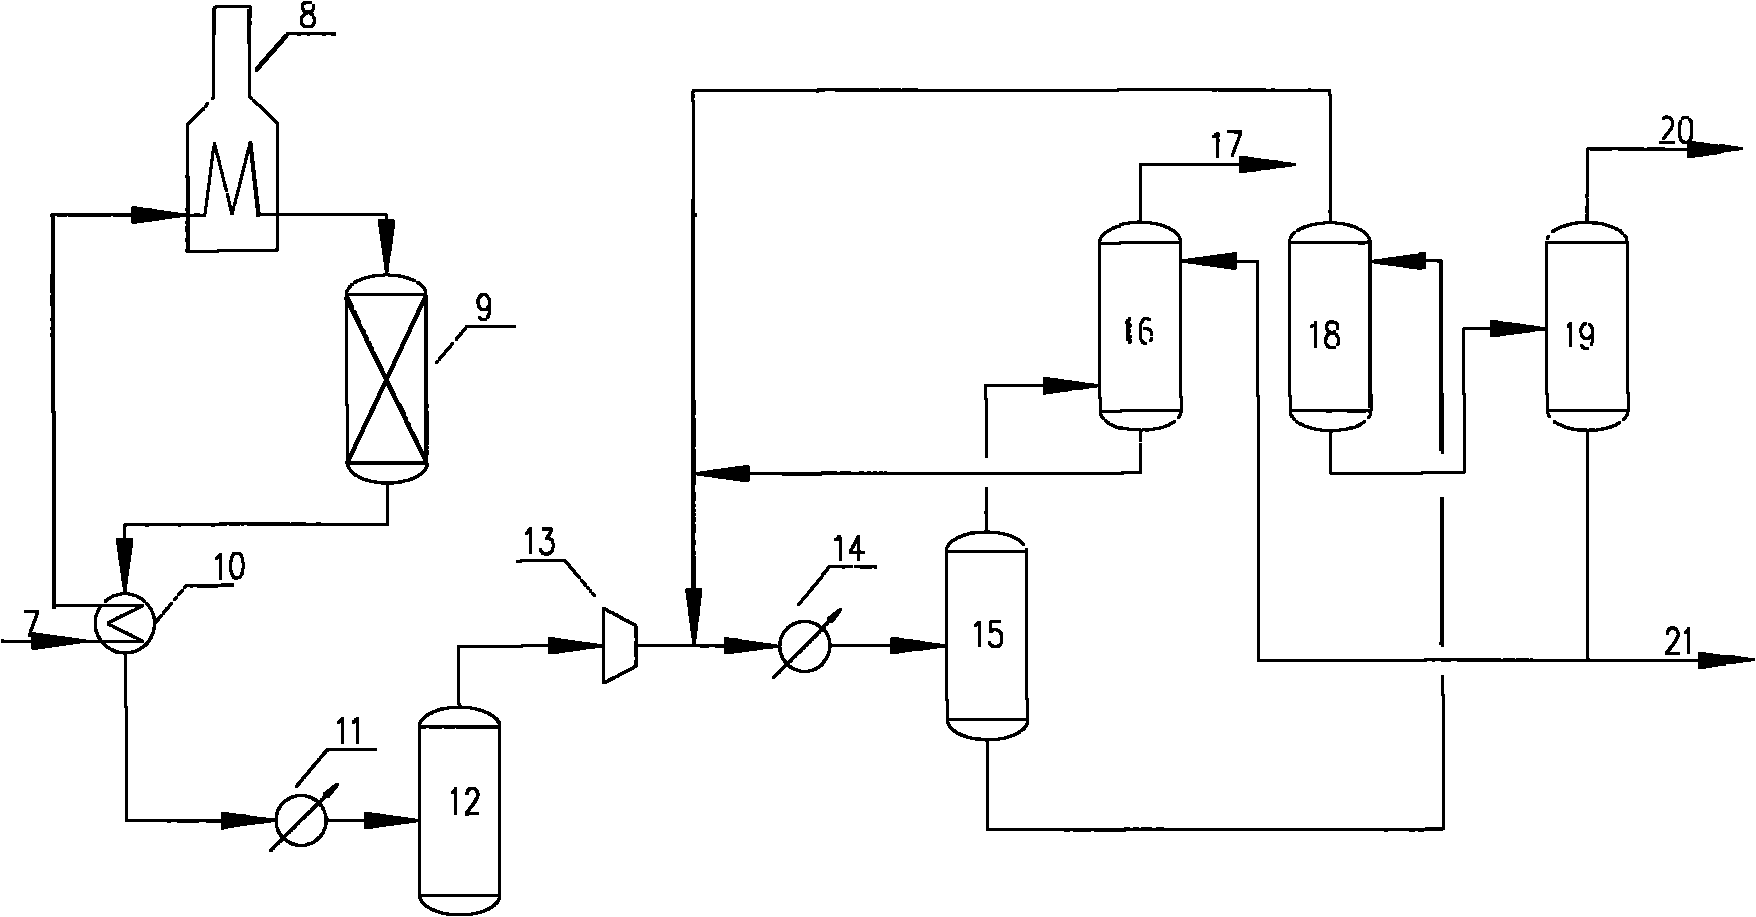 Method for producting propylene by catalytic pyrolysis of liquefied gas